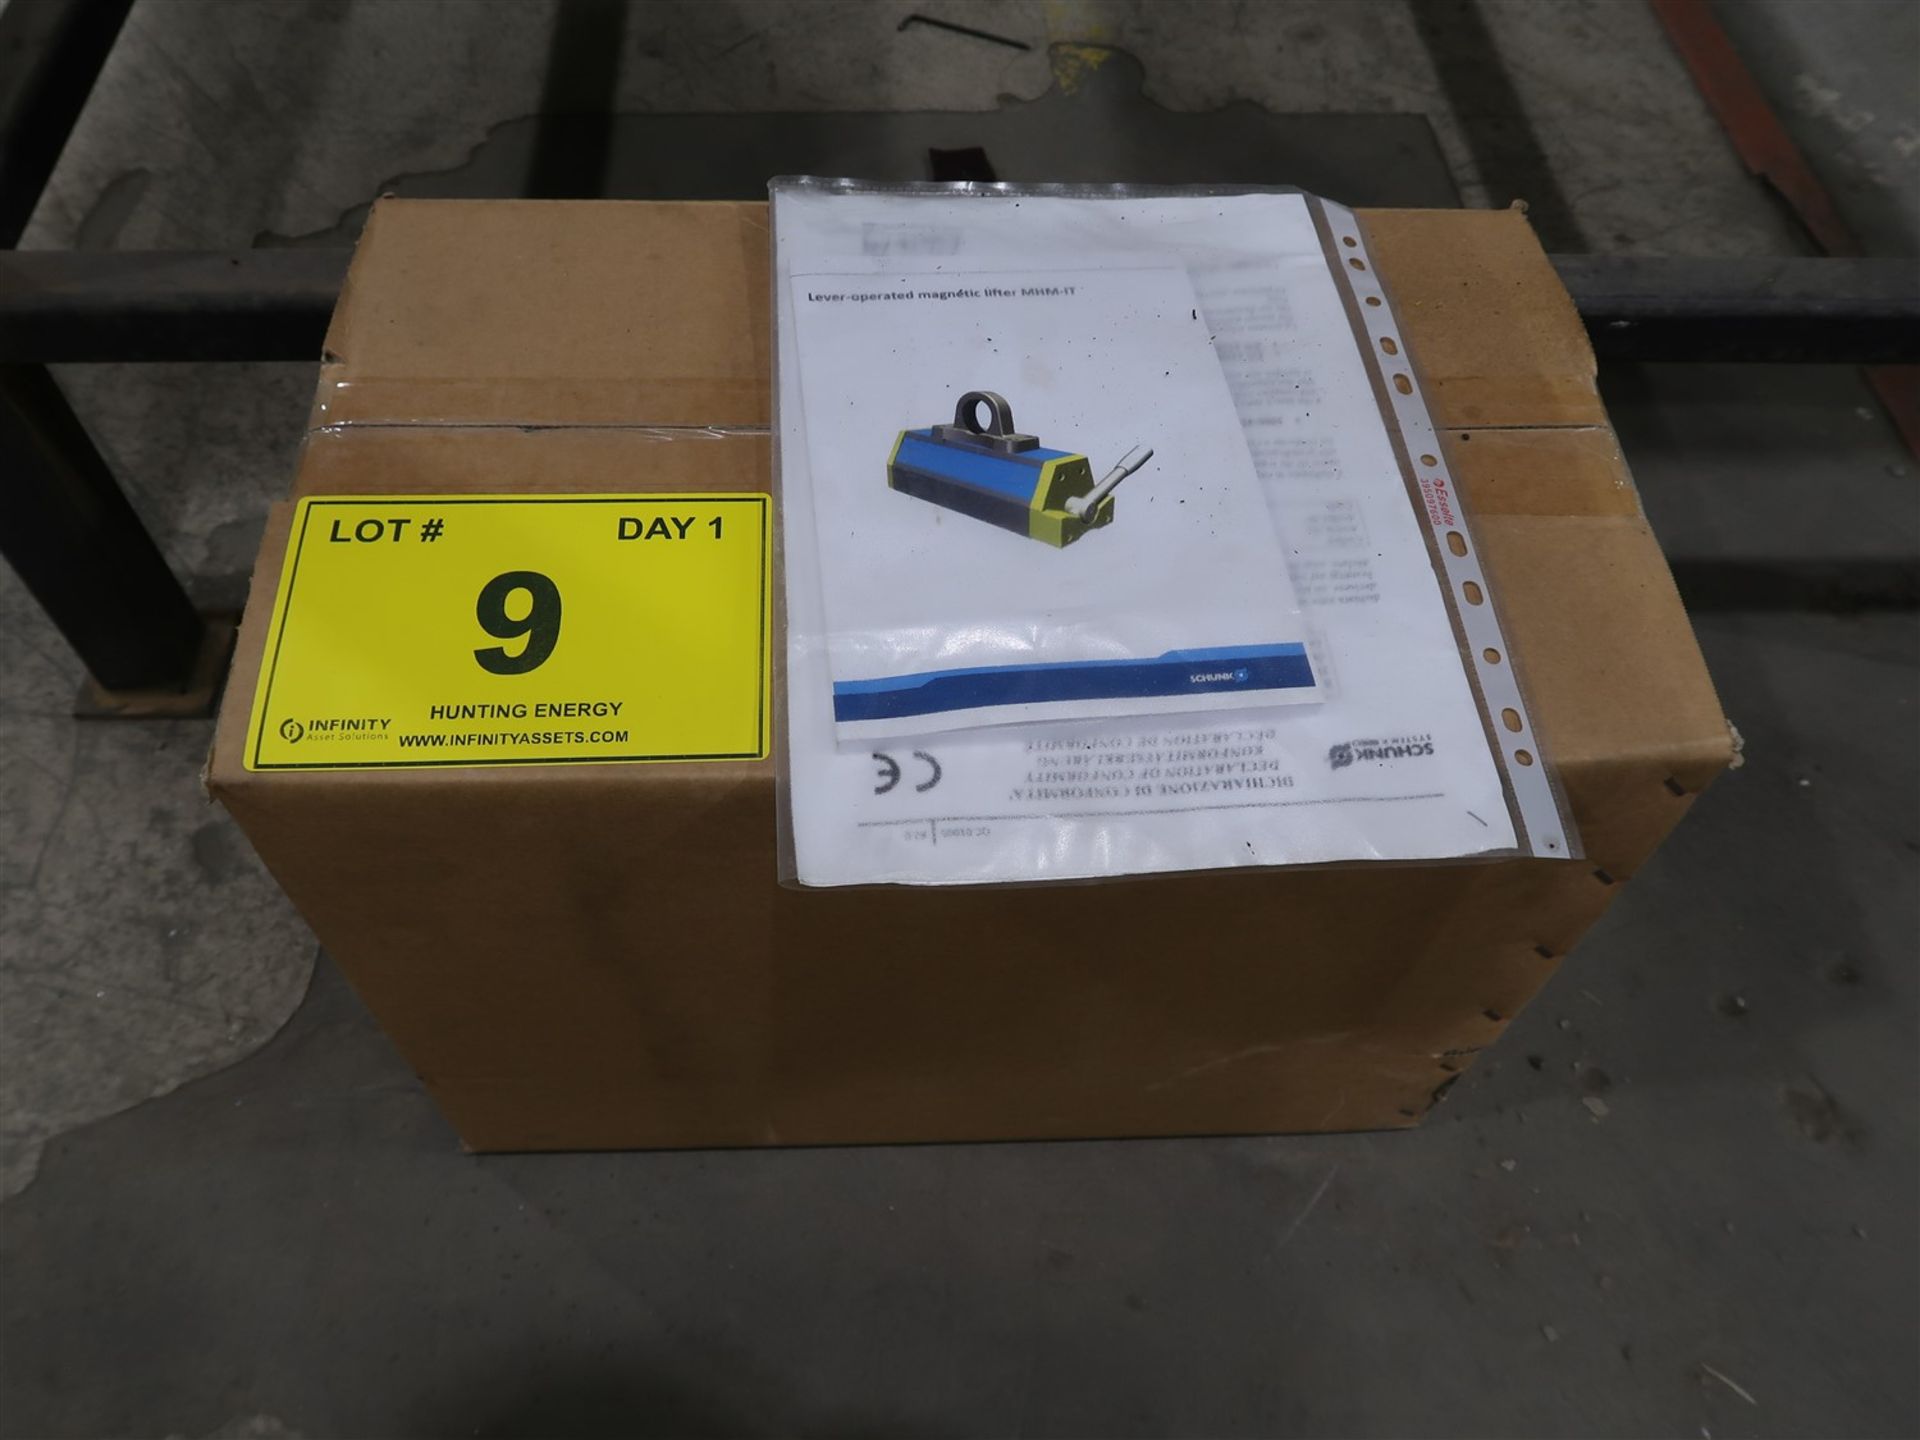 SCHUNK LEVER OPERATED MAGNETIC LIFTER, MOD. MHM-IT-1000, 1000 KG, NEW IN BOX